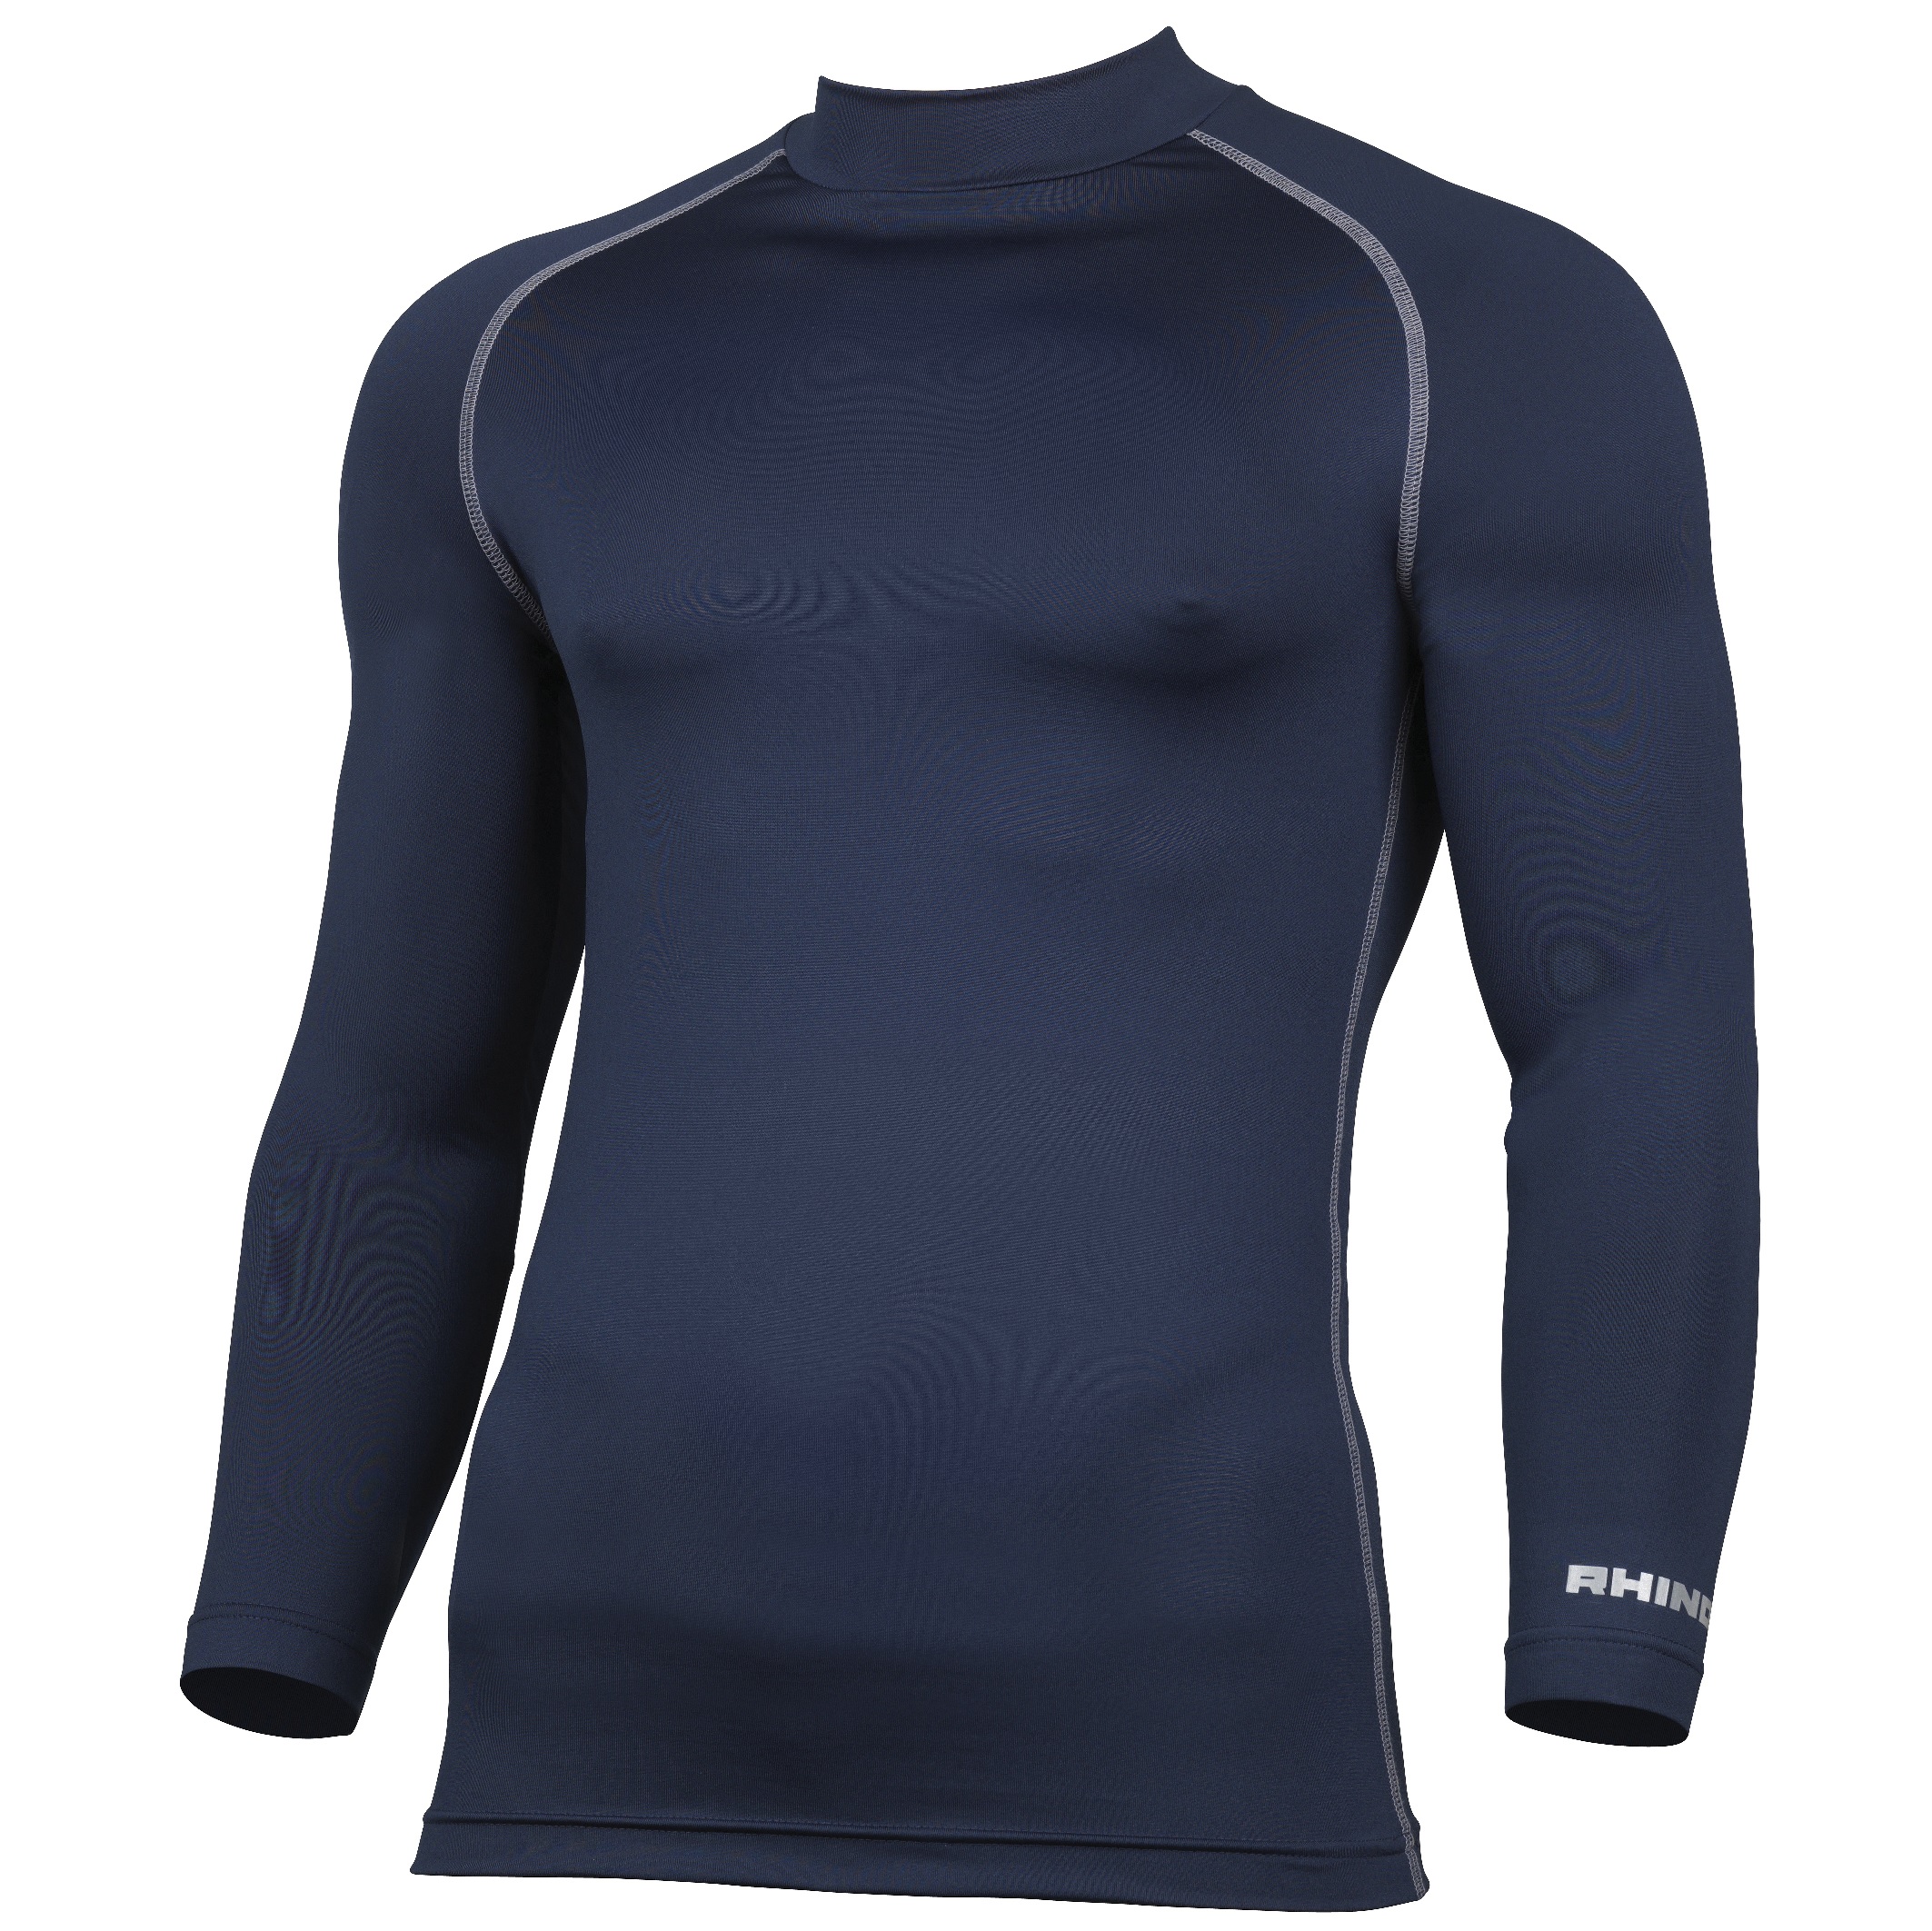 Review: Is The Rhino Thermal Base Layer Good For Cycling?